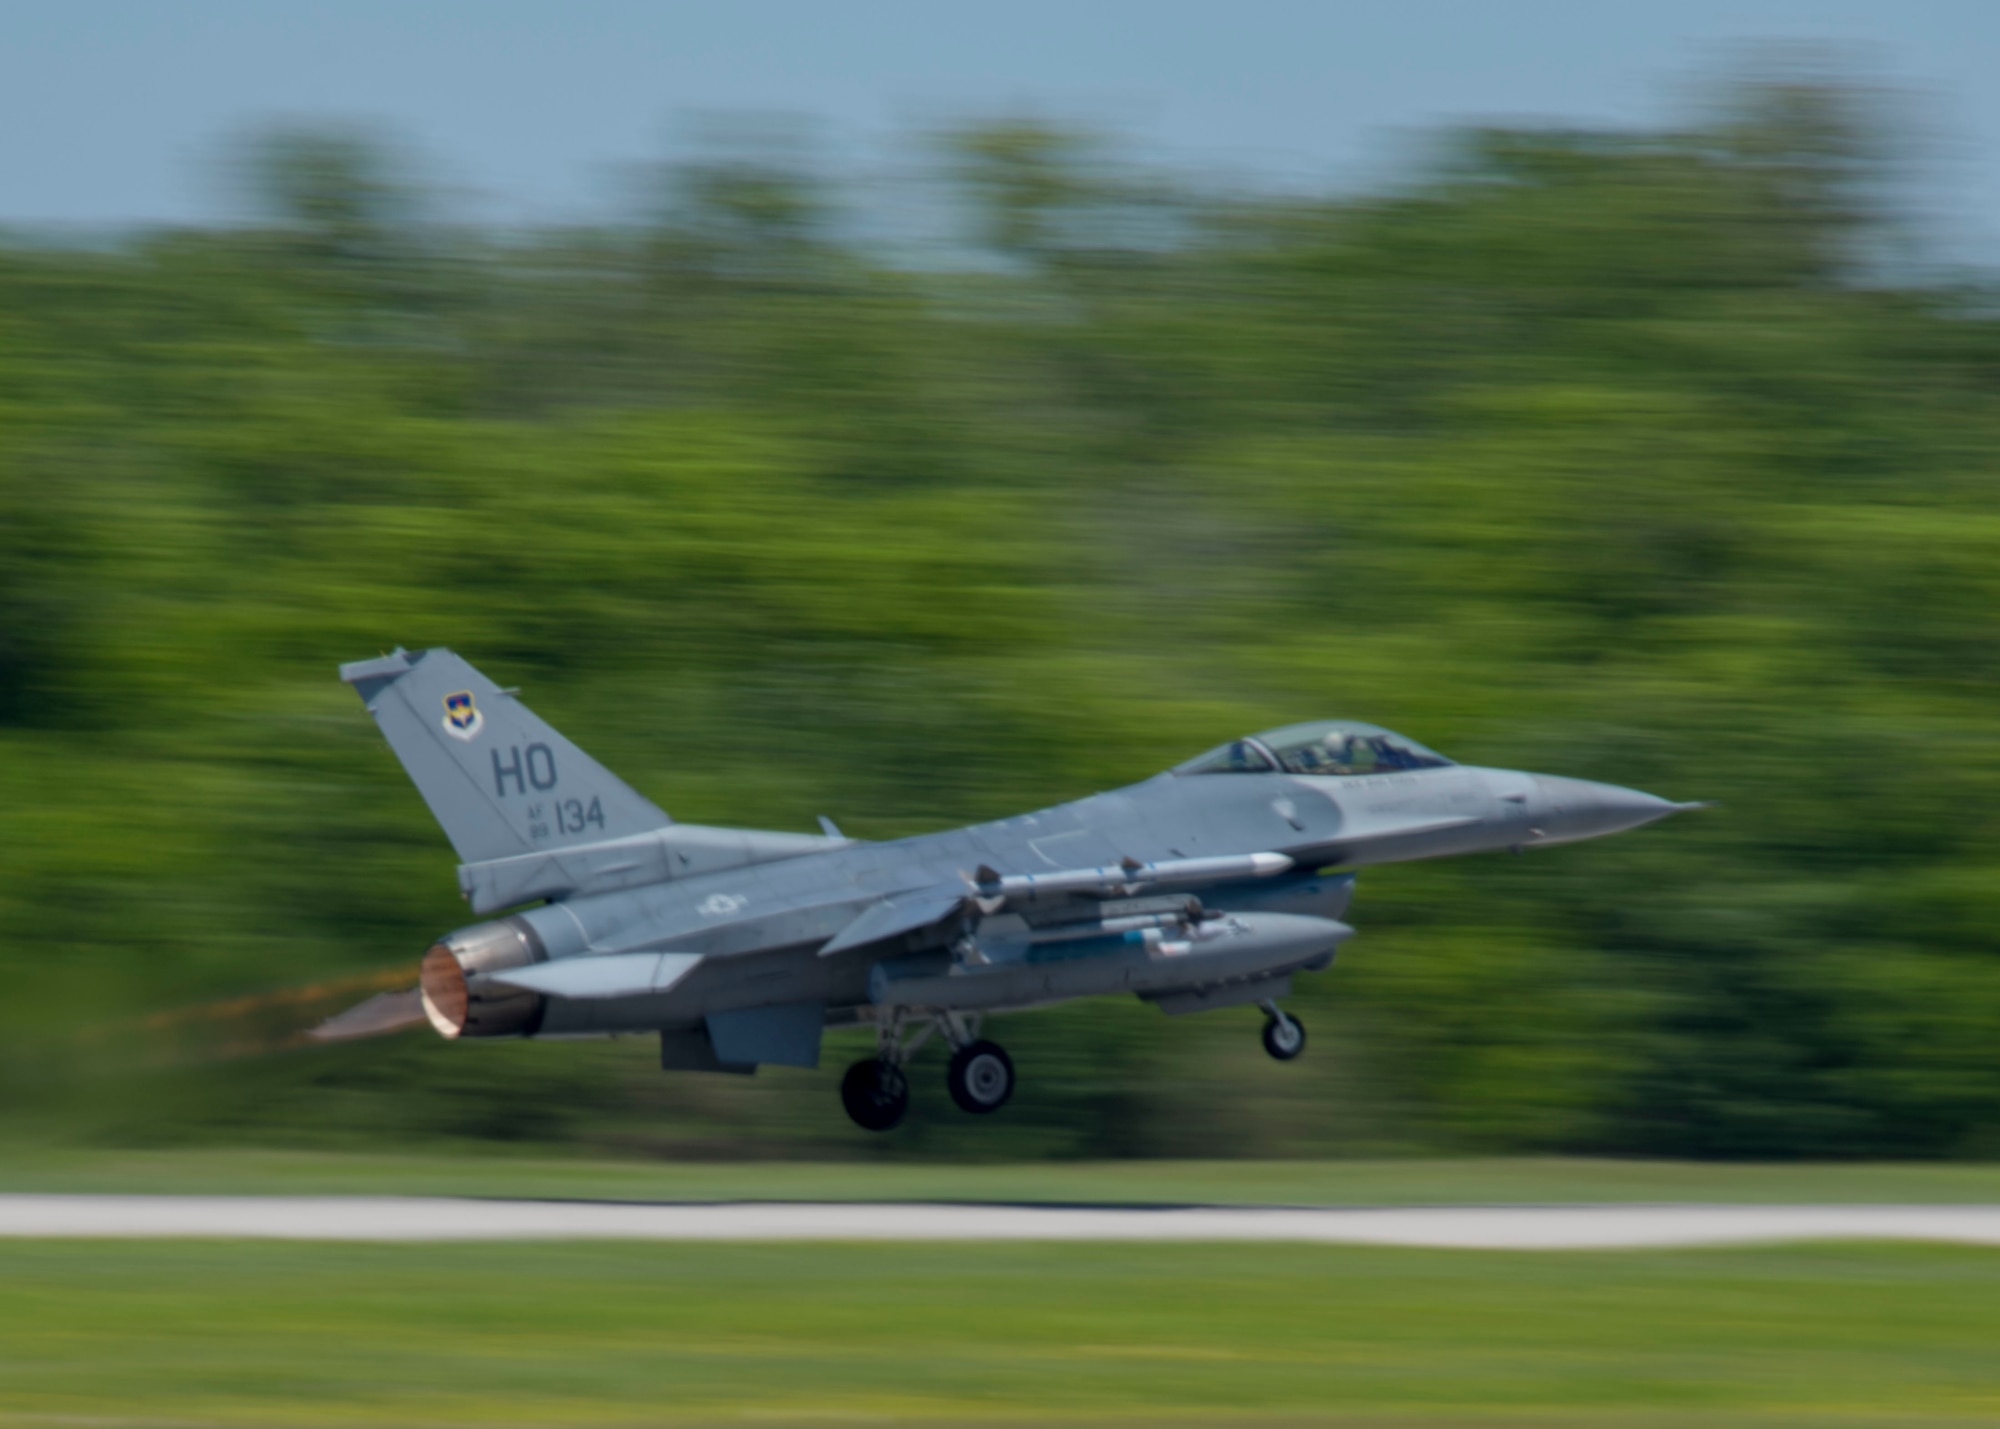 An F-16 Fighting Falcon from Holloman's 8th Fighter Squadron, takes off down the runway, April 10, 2019, on Naval Air Station Joint Reserve Base New Orleans, La. Lt. Col. Mark Sletten, 8th FS commander, said the unit set up simulated combat scenarios so the student pilots could practice working as a team with another unit. (U.S. Air Force photo by Airman 1st Class Kindra Stewart)